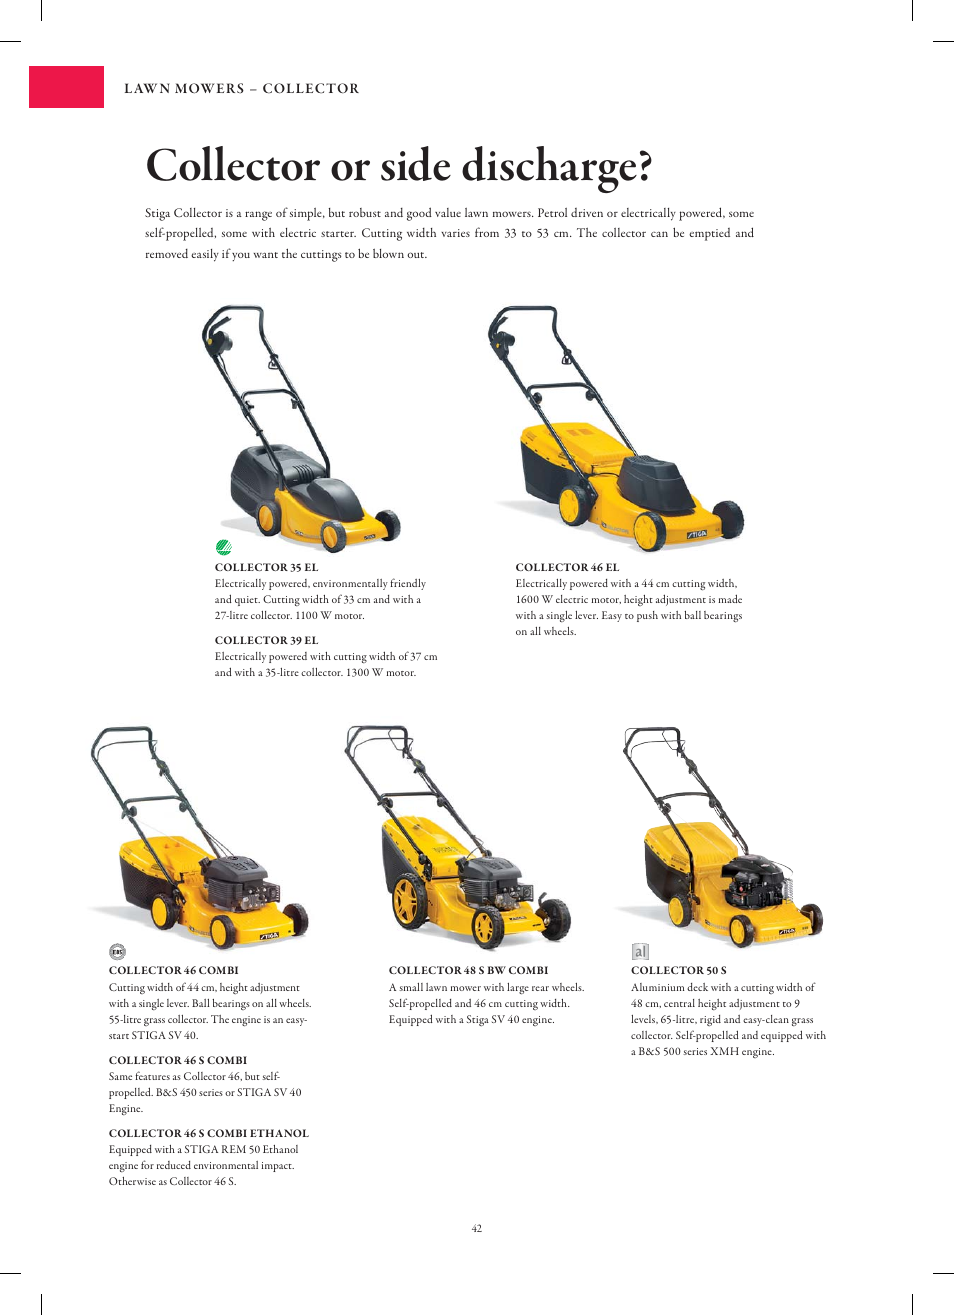 Collector or side discharge | Stiga Garden Range Primo User Manual | Page  42 / 76